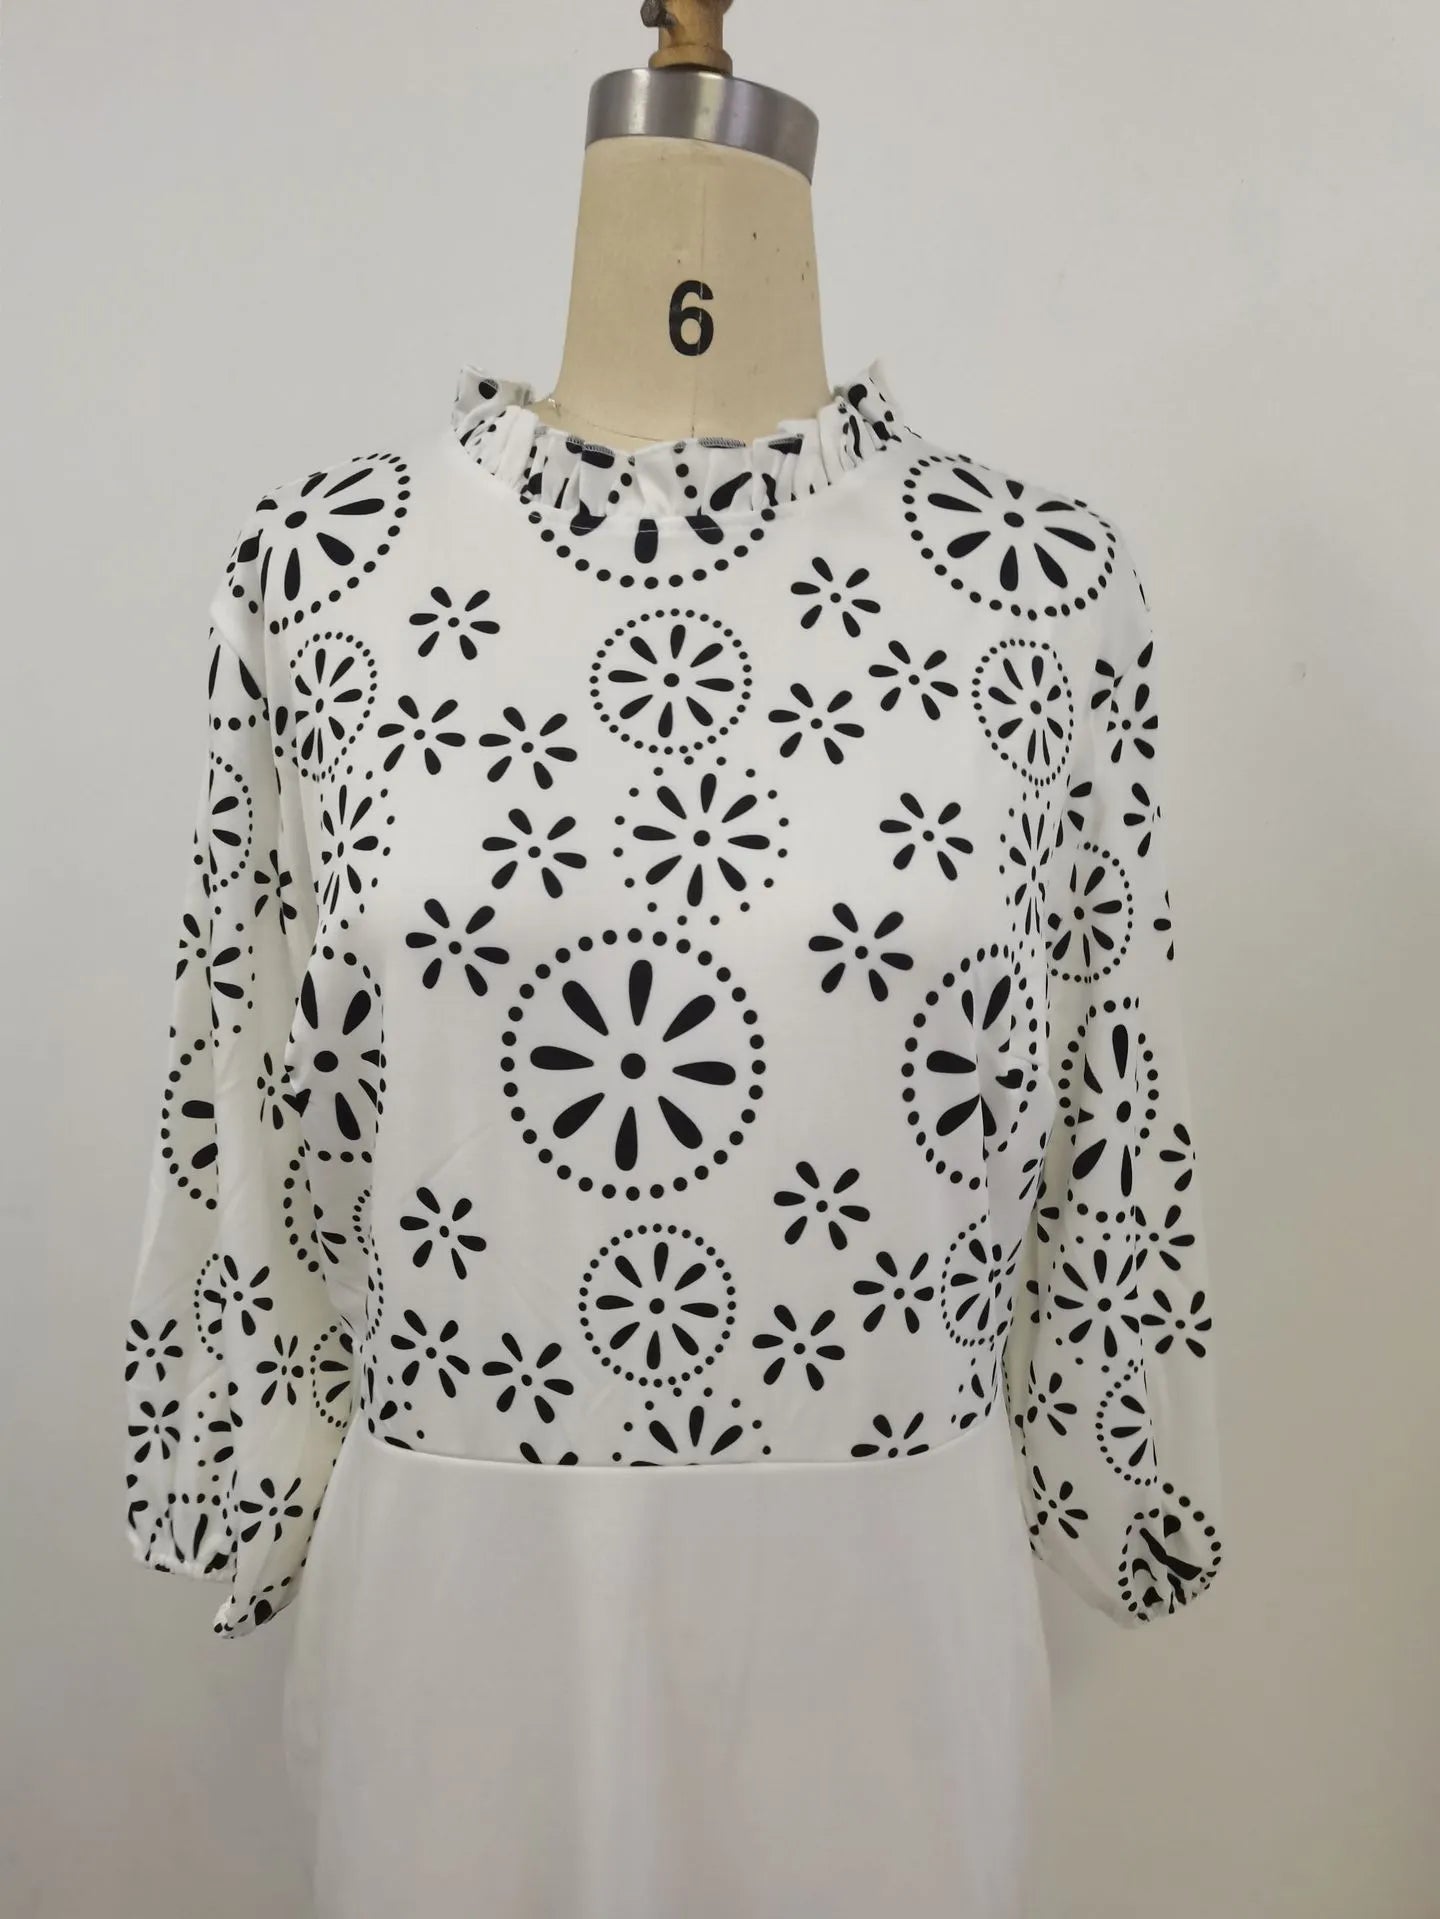 Elegant African Long Sleeve White Dresses: Plus Size Grace and Style - Flexi Africa - Free Delivery at www.flexiafrica.com